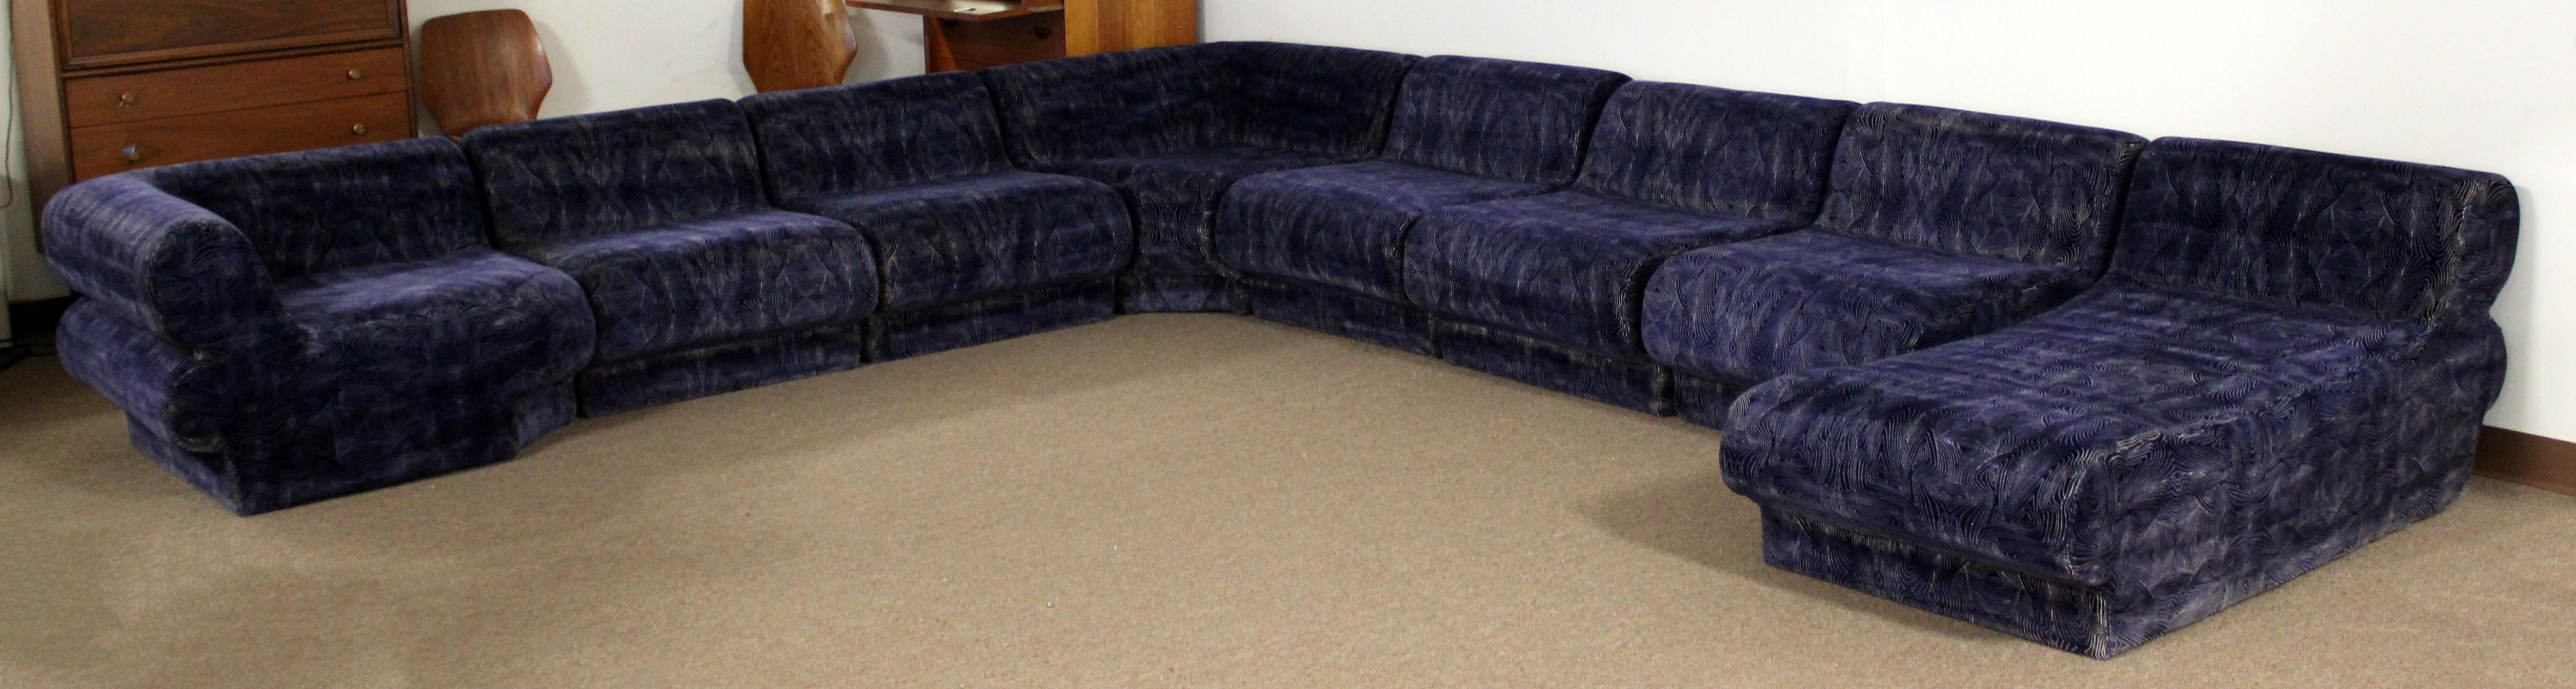 For your consideration is an incredible, nine piece sectional modular sofa, blue velvet with white accents upholstery, by Preview. In very good condition. The dimensions of the two corner pieces are 38